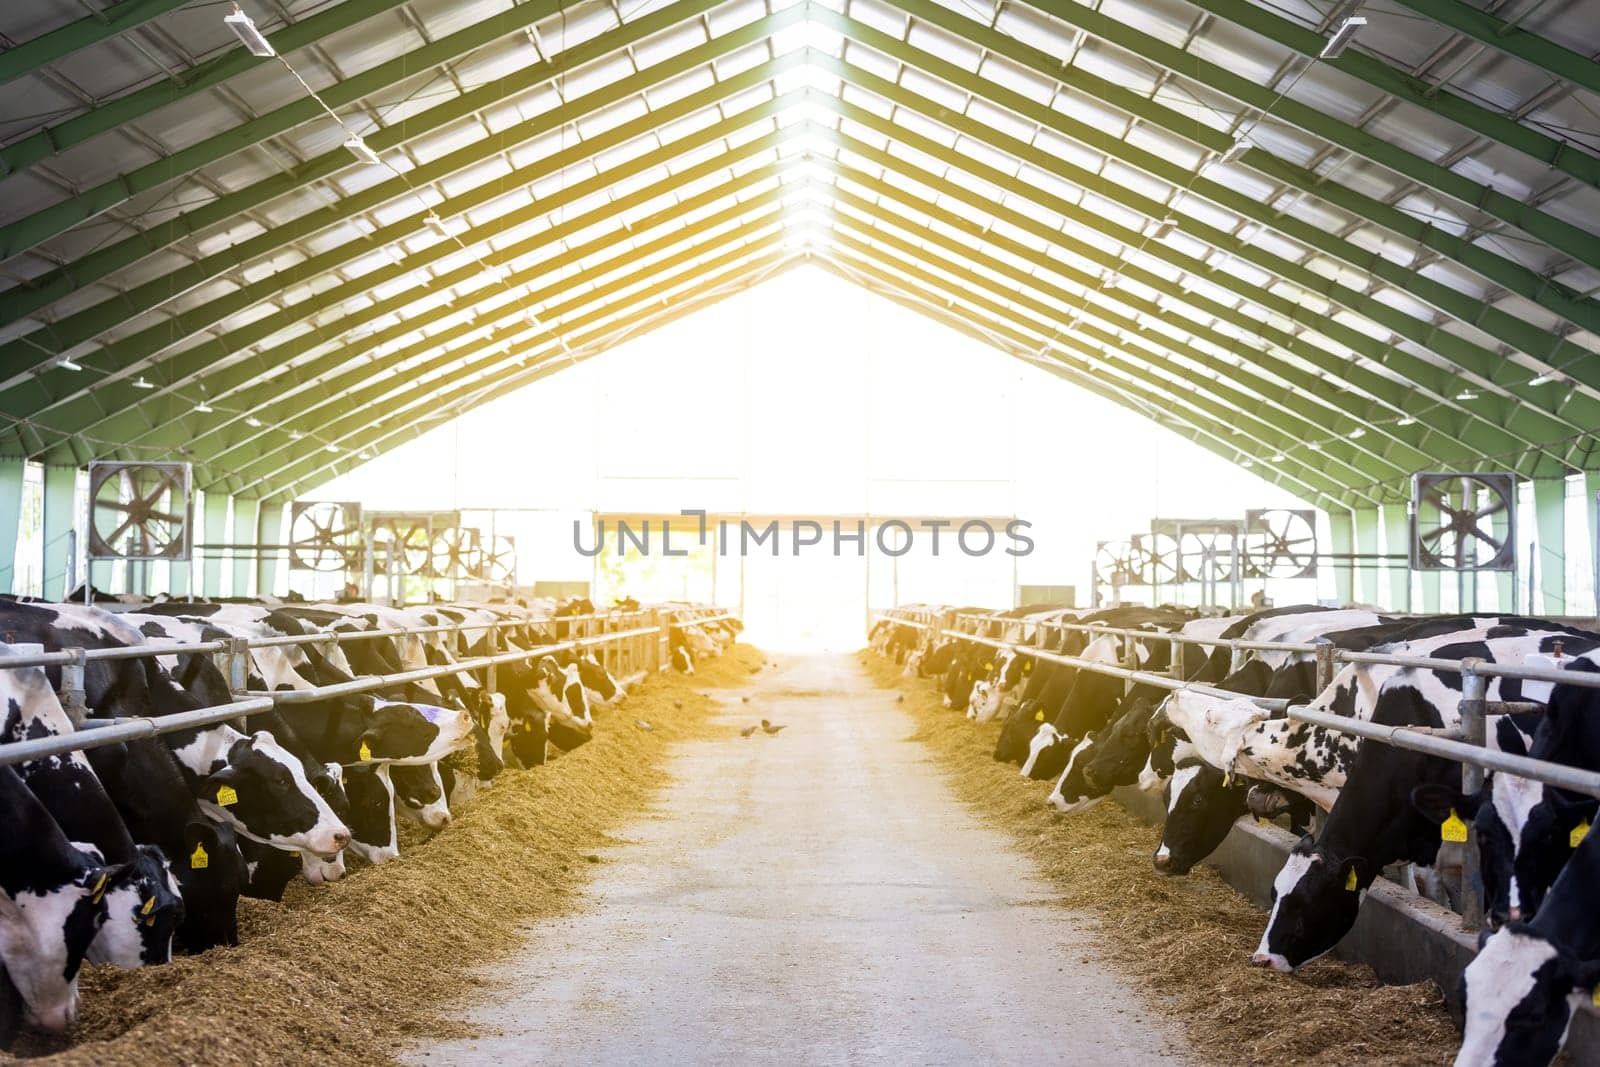 Cows in a farm, dairy cows laying on the fresh hay, concept of modern farm cowshed by Kadula